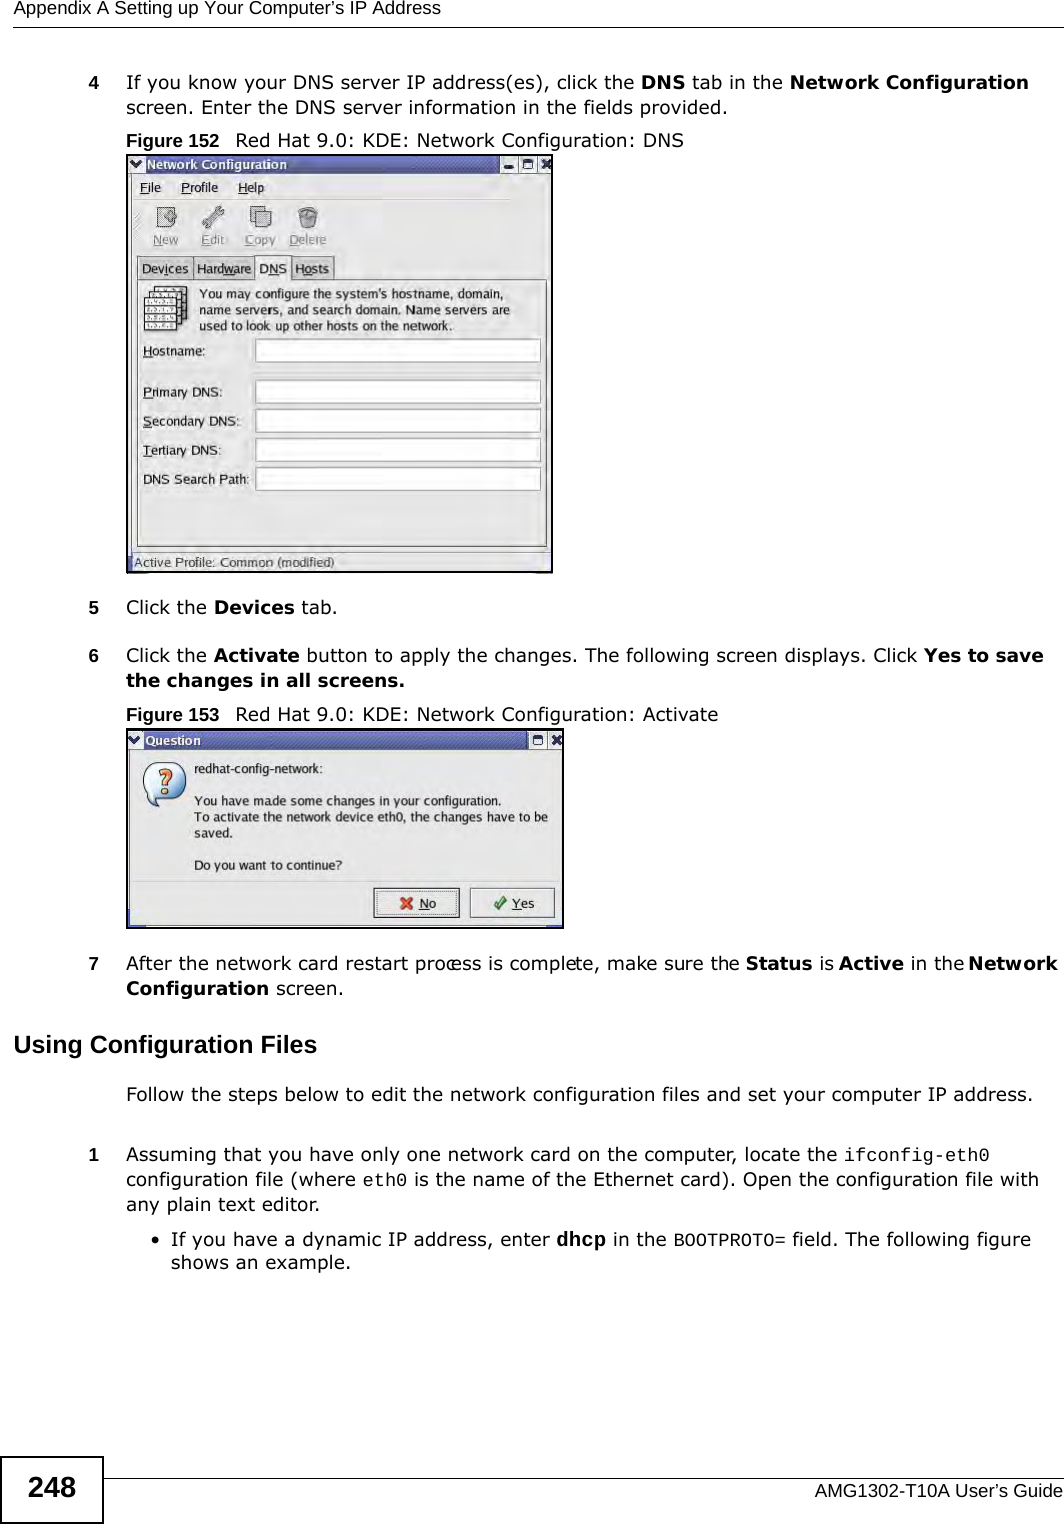 Appendix A Setting up Your Computer’s IP AddressAMG1302-T10A User’s Guide2484If you know your DNS server IP address(es), click the DNS tab in the Network Configuration screen. Enter the DNS server information in the fields provided. Figure 152   Red Hat 9.0: KDE: Network Configuration: DNS 5Click the Devices tab. 6Click the Activate button to apply the changes. The following screen displays. Click Yes to save the changes in all screens.Figure 153   Red Hat 9.0: KDE: Network Configuration: Activate  7After the network card restart process is complete, make sure the Status is Active in the Network Configuration screen.Using Configuration FilesFollow the steps below to edit the network configuration files and set your computer IP address. 1Assuming that you have only one network card on the computer, locate the ifconfig-eth0 configuration file (where eth0 is the name of the Ethernet card). Open the configuration file with any plain text editor.• If you have a dynamic IP address, enter dhcp in the BOOTPROTO= field. The following figure shows an example. 